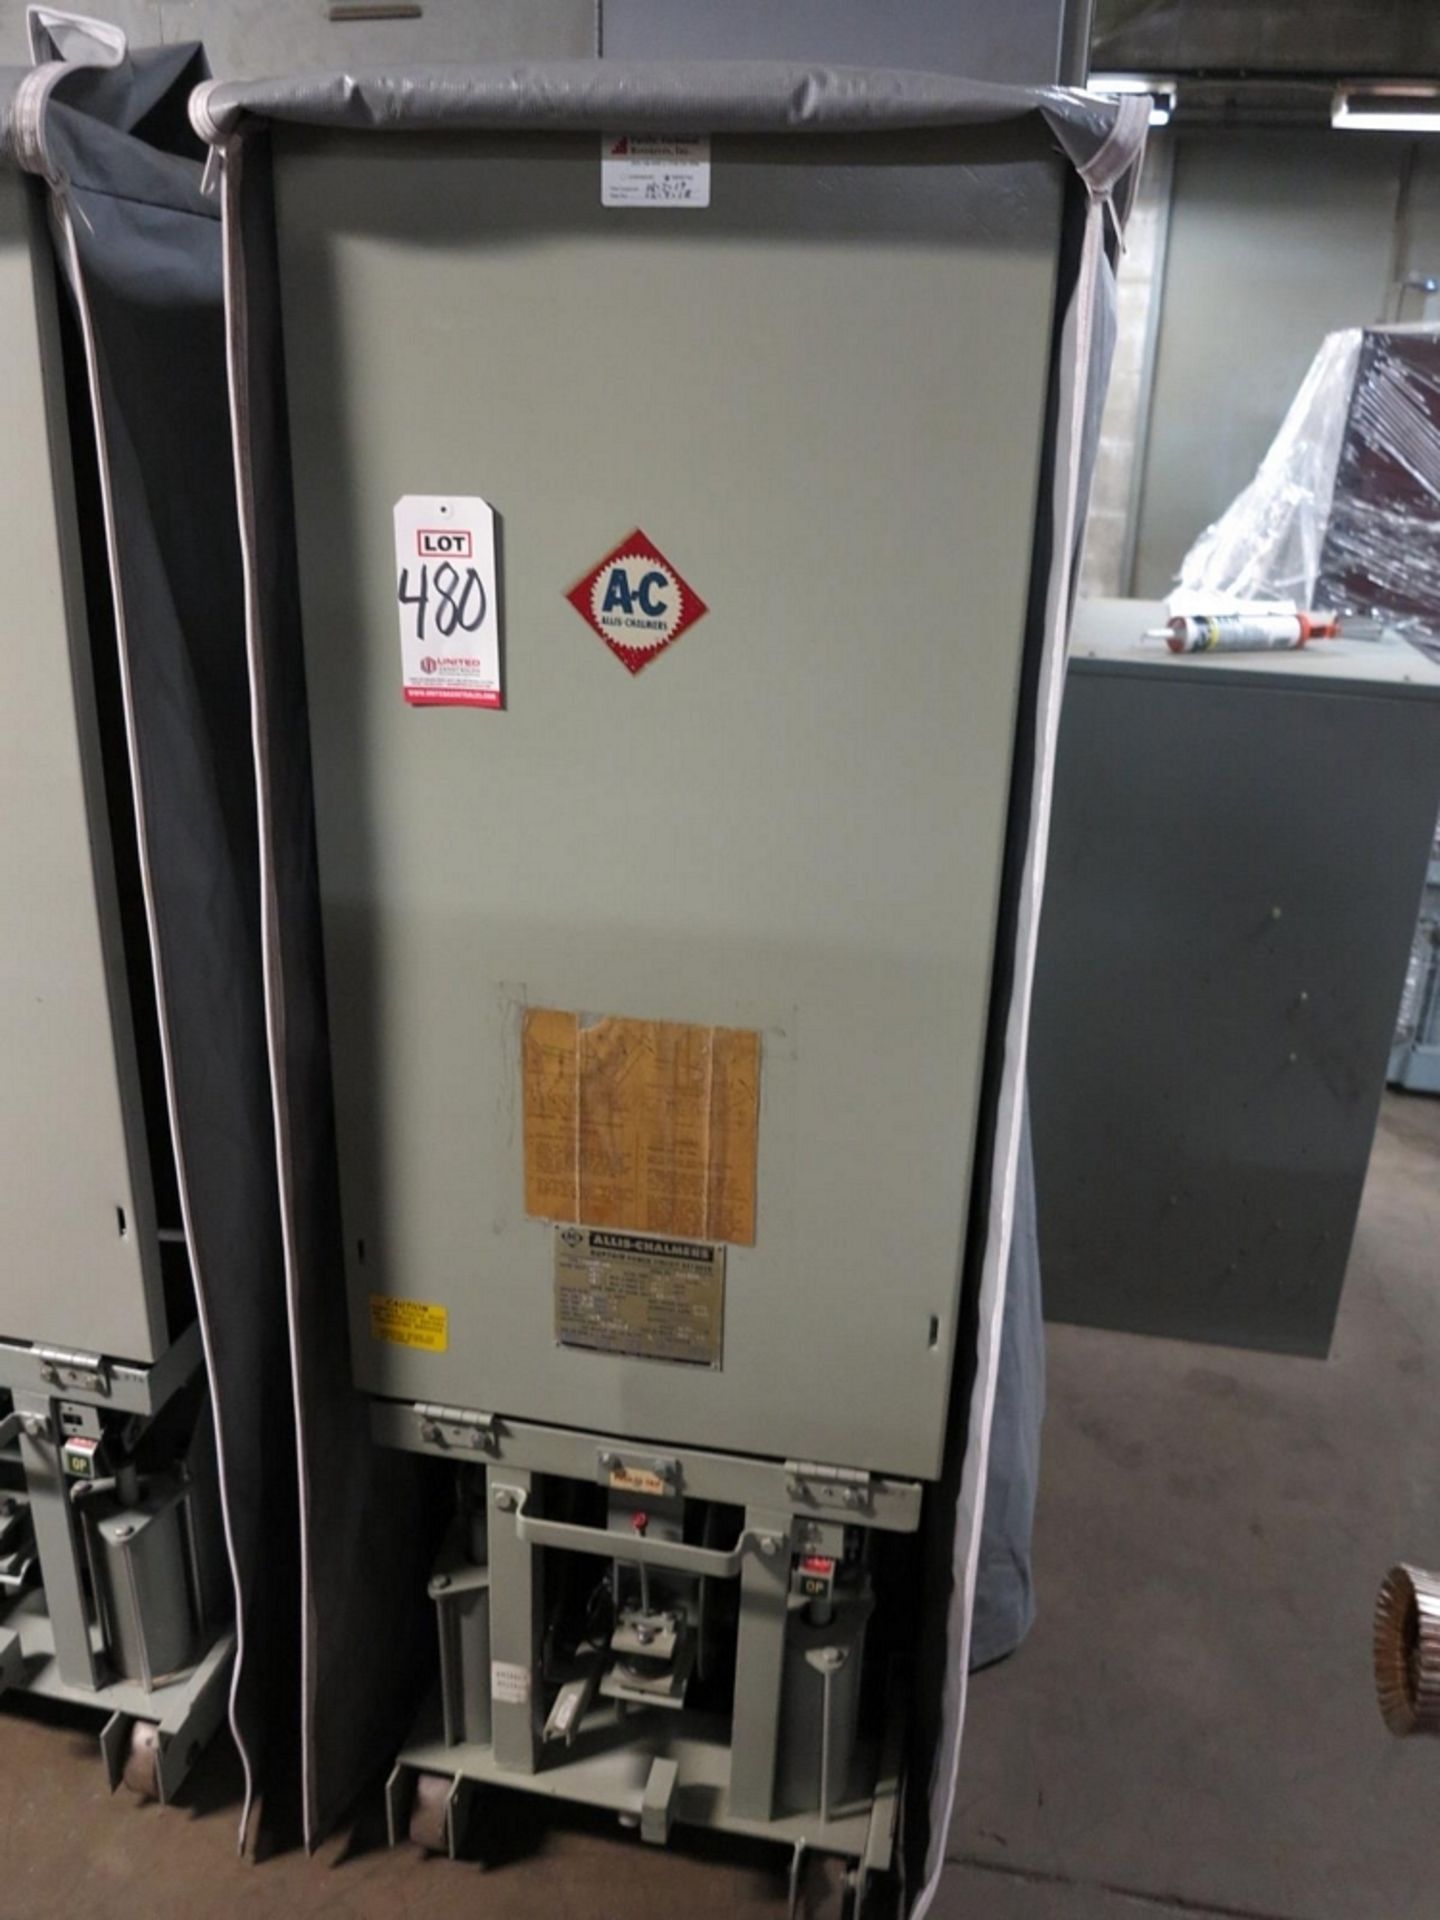 ALLIS CHALMERS CIRCUIT BREAKER, TYPE MA-250A-1, 4160 V, 1200 A